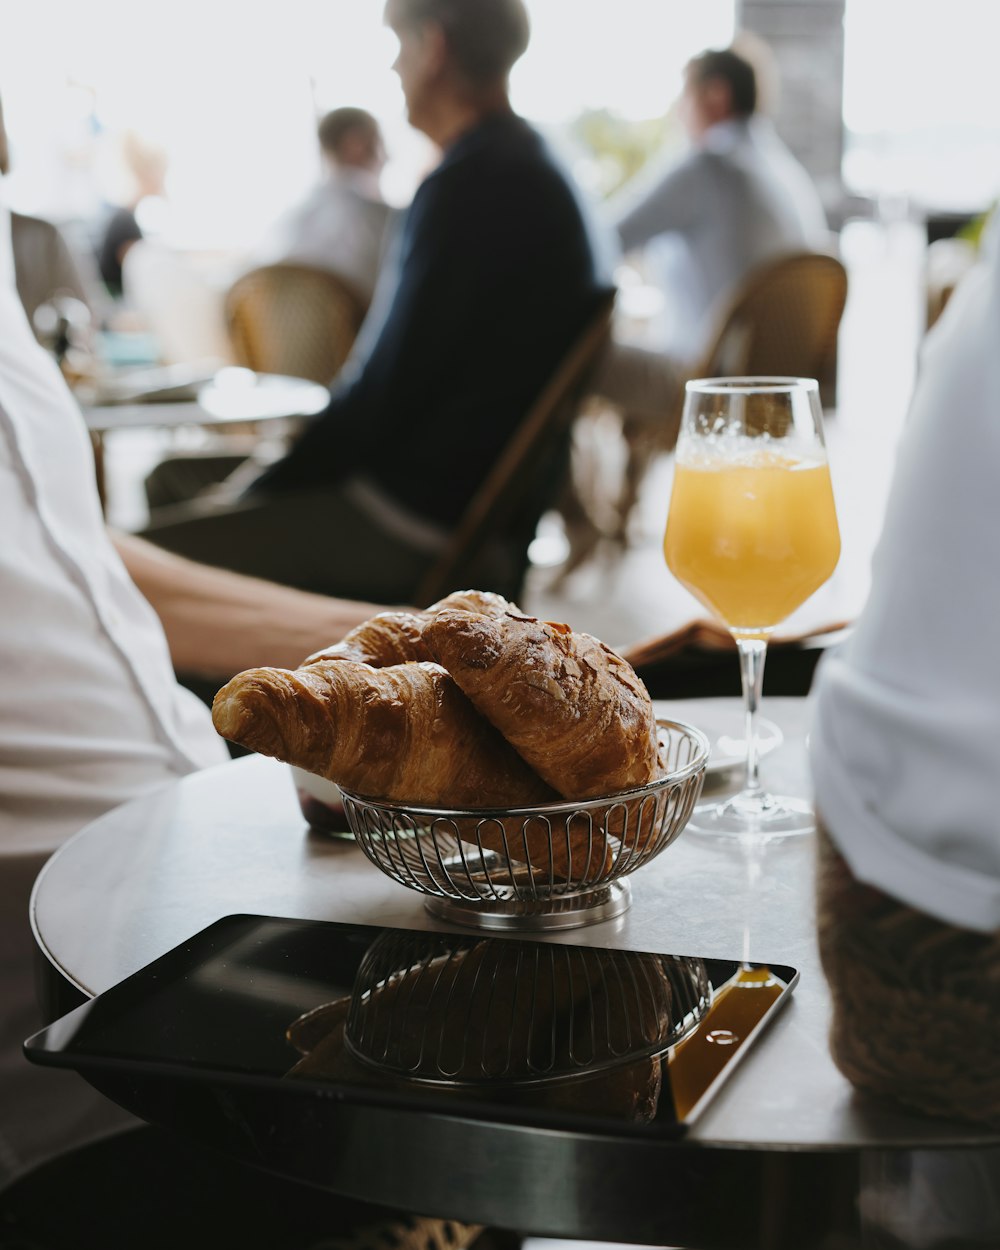 a glass of orange juice and some croissants on a table